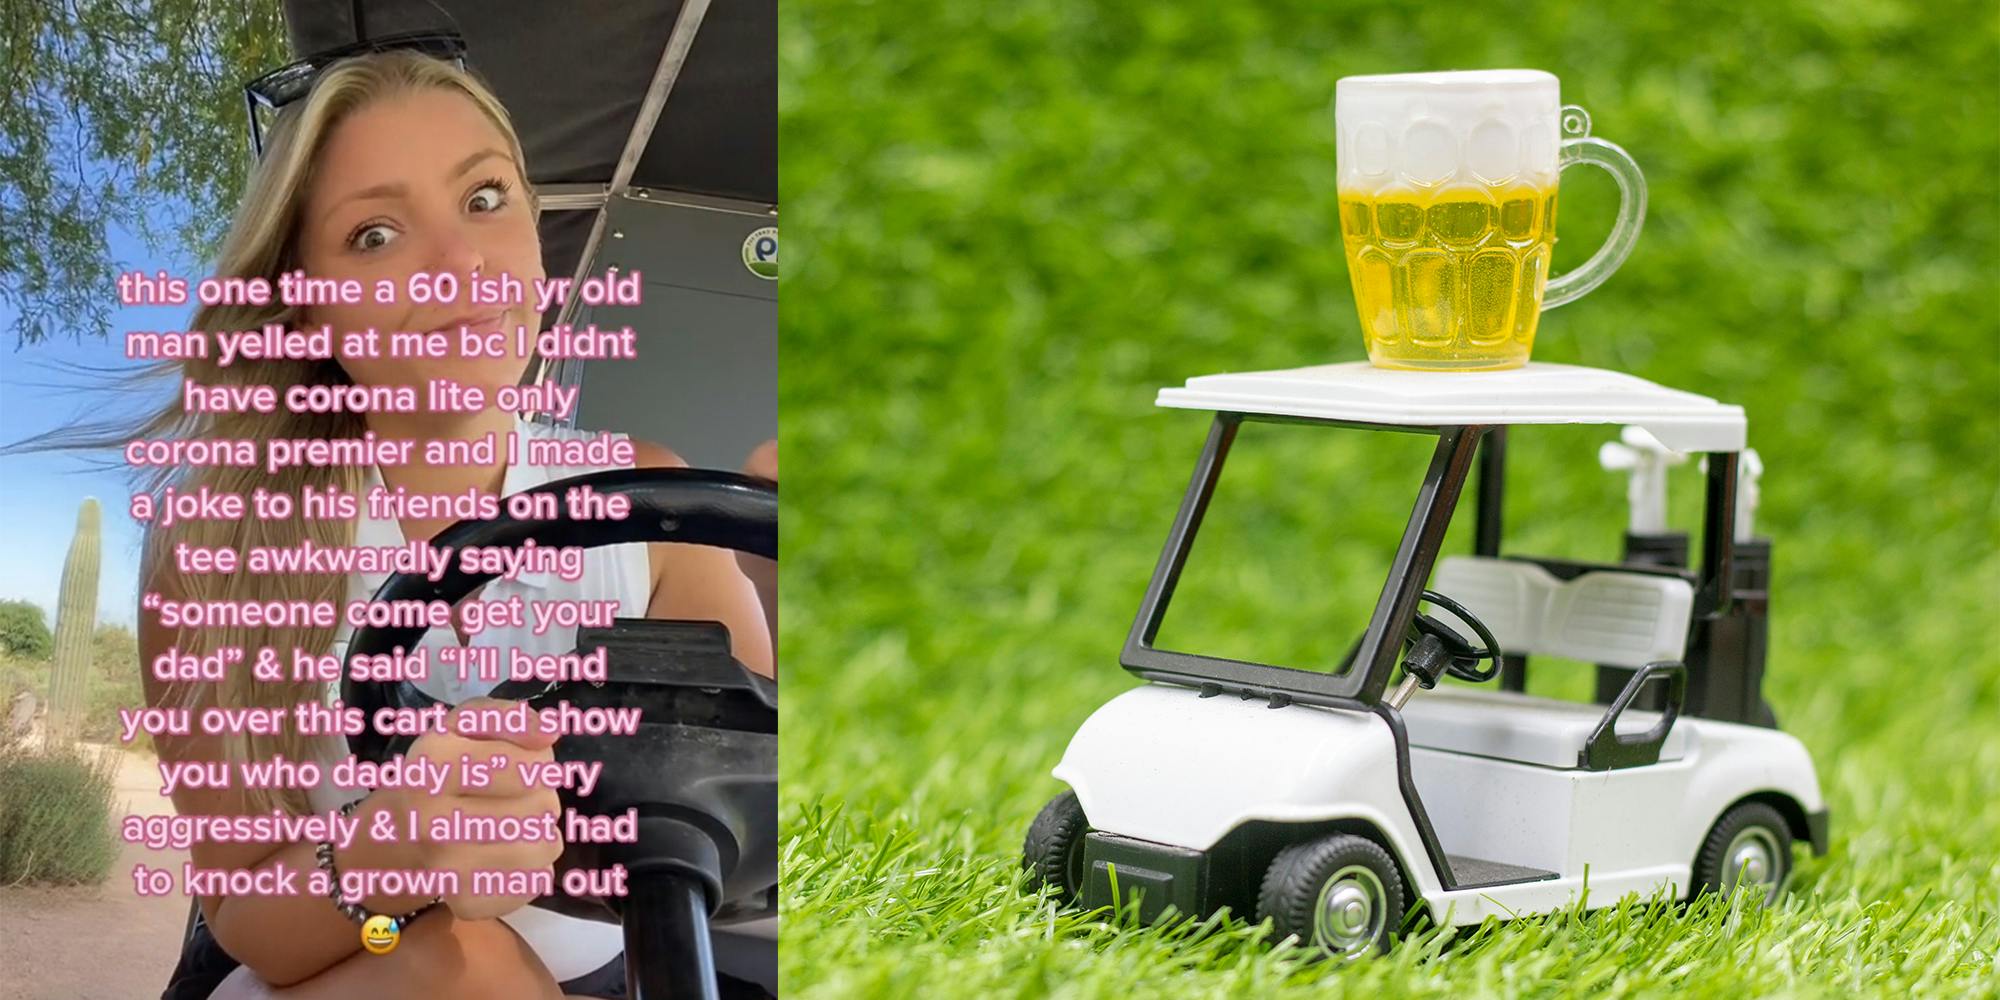 young woman in golf cart with caption "this one time a 60 ish yr old man yelled at me bc i didn't have corona lite only corona premier and i made a joke to his friends on the tee awkwardly saying 'someone come get your dad' & he said 'I'll bend you over this cart and show you who daddy is" very aggressively & I almost had to knock a grown man out" (l) toy golf cart with fake beer on top (r)